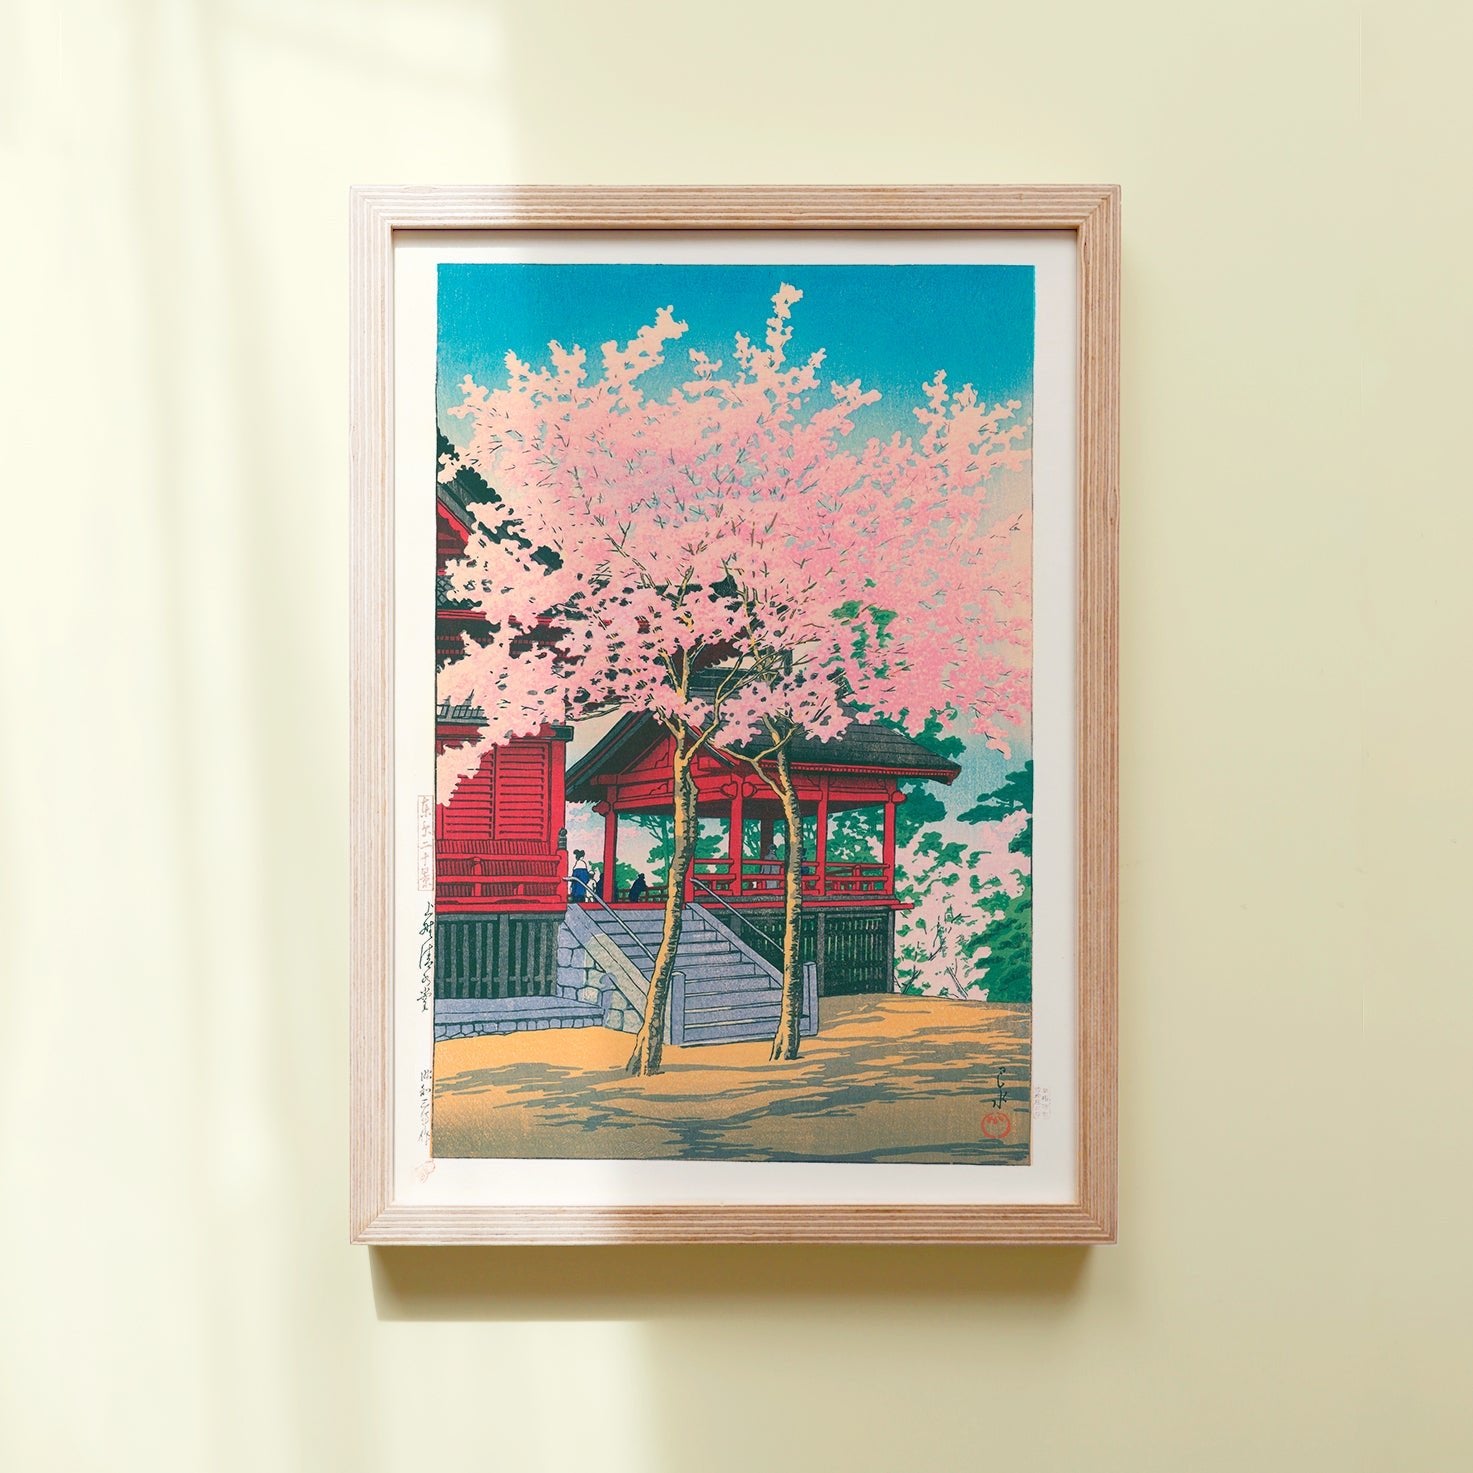 Framed Japanese Art Poster: Cherry tree in bloom with a red building, Kiyomizu Kannon-dō Temple, by Kawase Hasui.